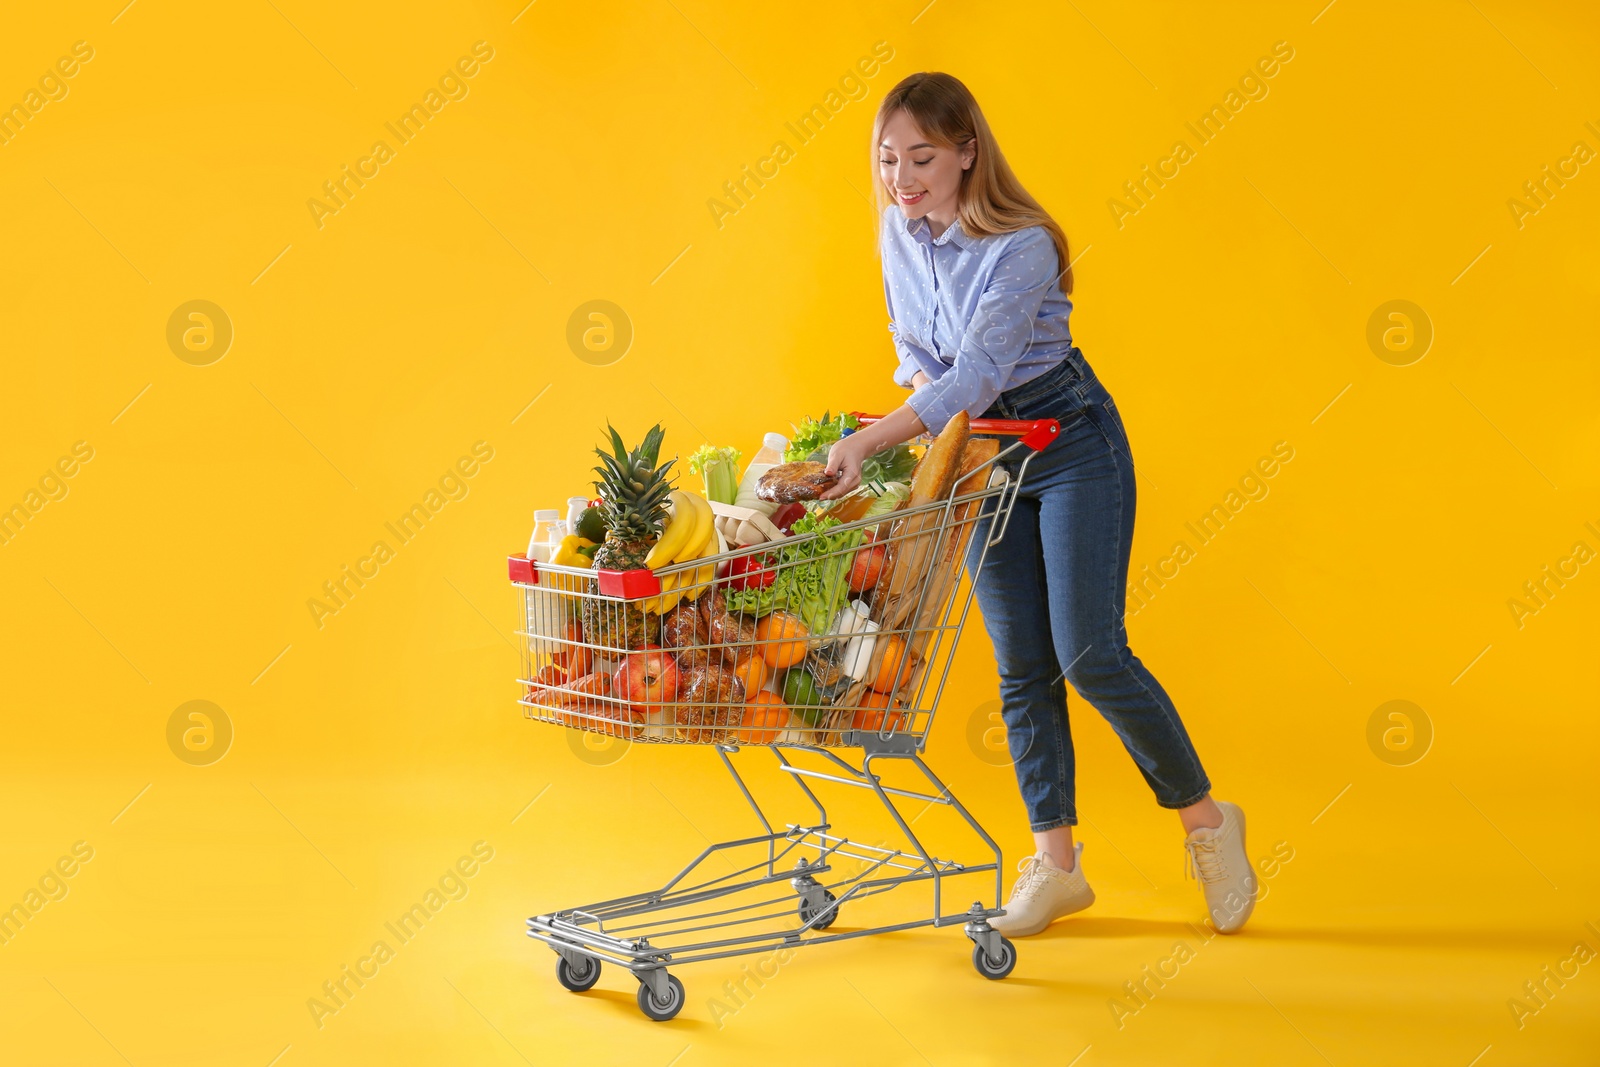 Photo of Young woman with shopping cart full of groceries on yellow background